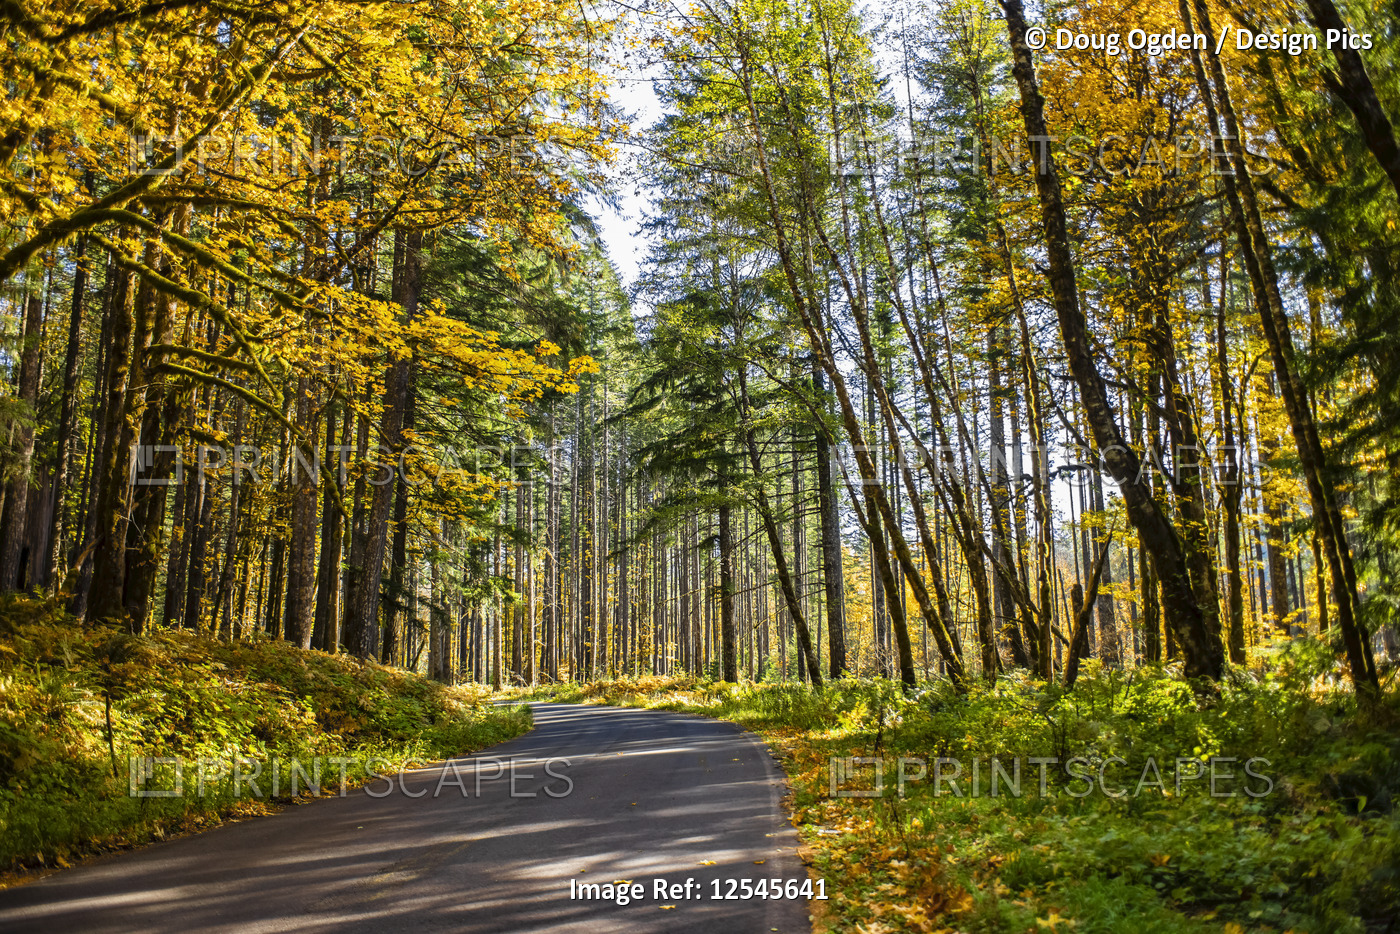 Autumn coloured foliage along a country road, Gifford Pinchot National Forest; ...